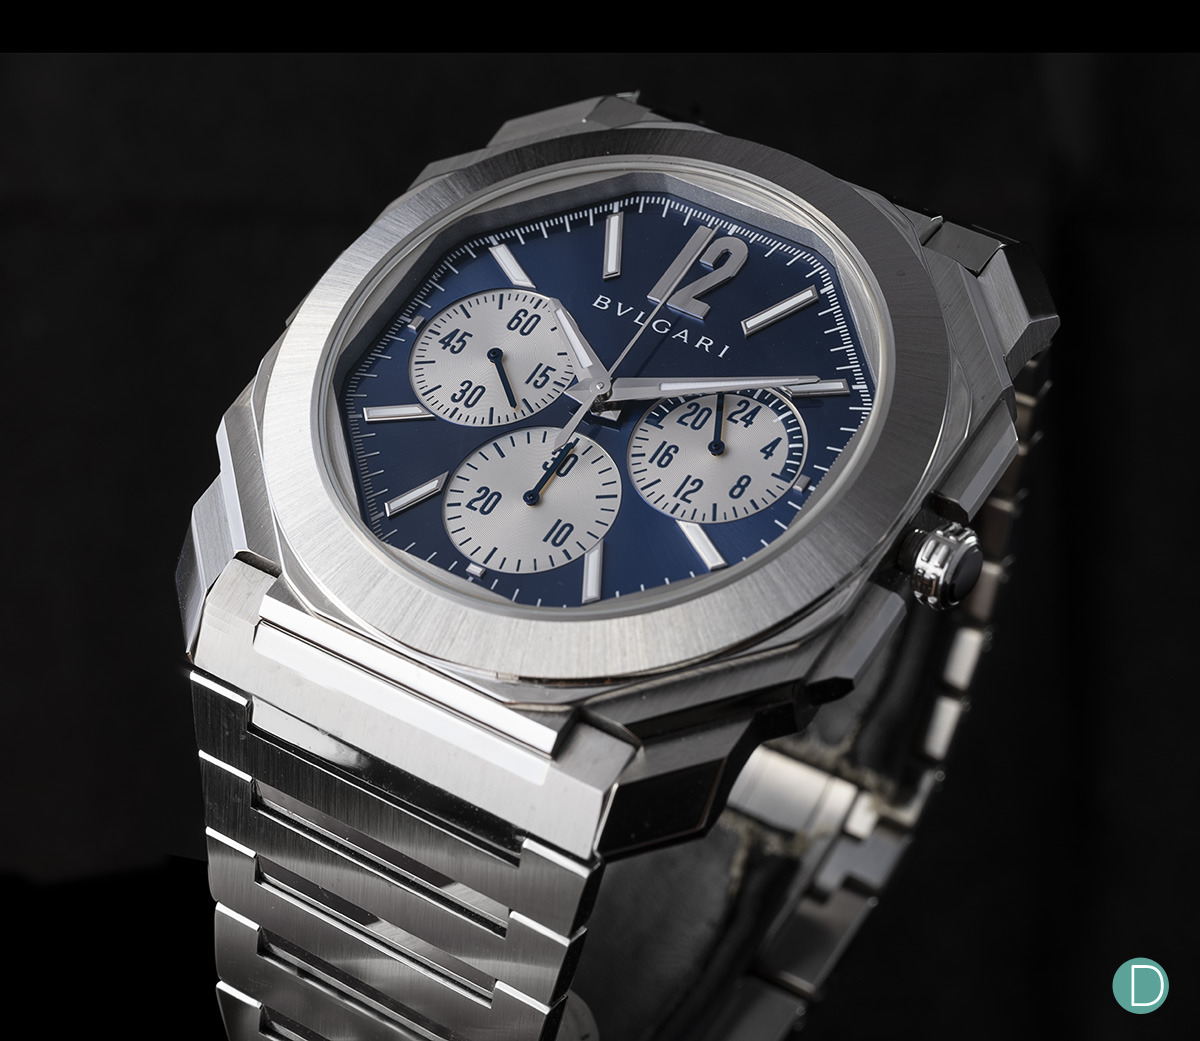 Bvlgari Octo Finissimo S Chronograph GMT: this handsome new watch gets a  week on the wrist - detailed review -